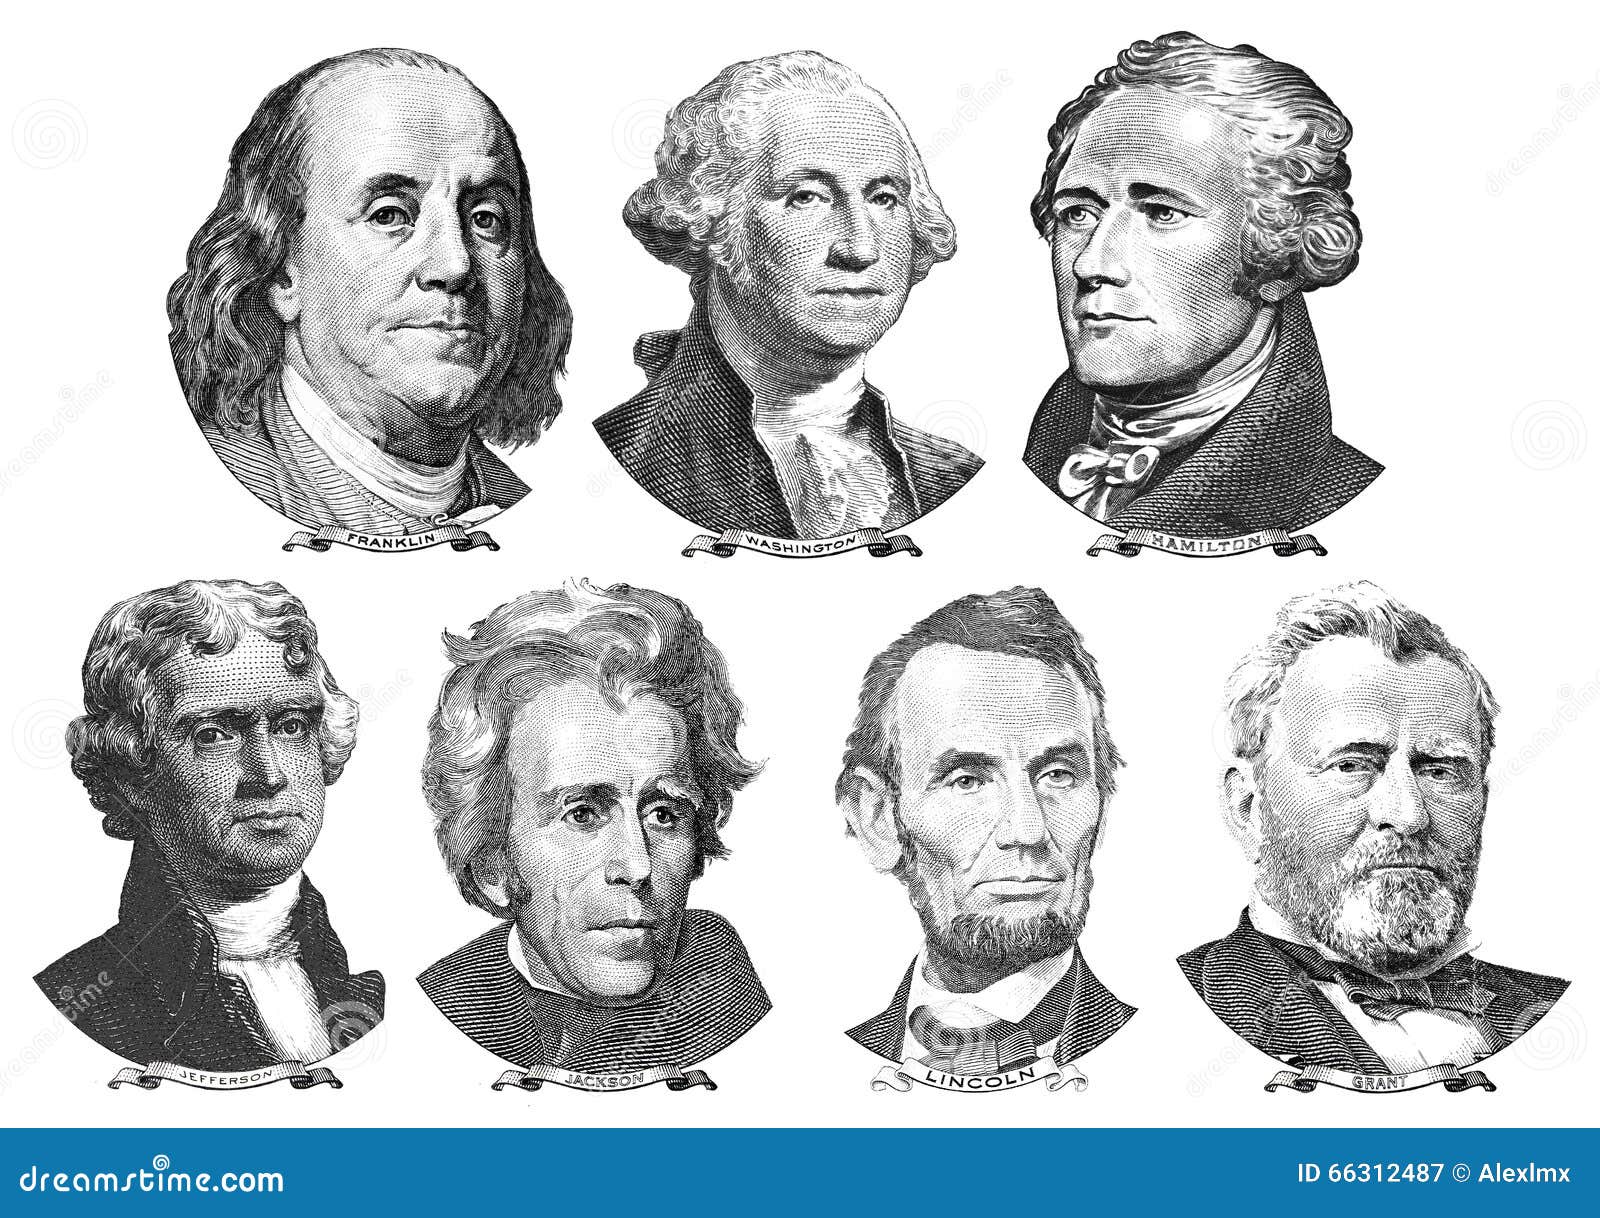 portraits of presidents and politicians from dollars